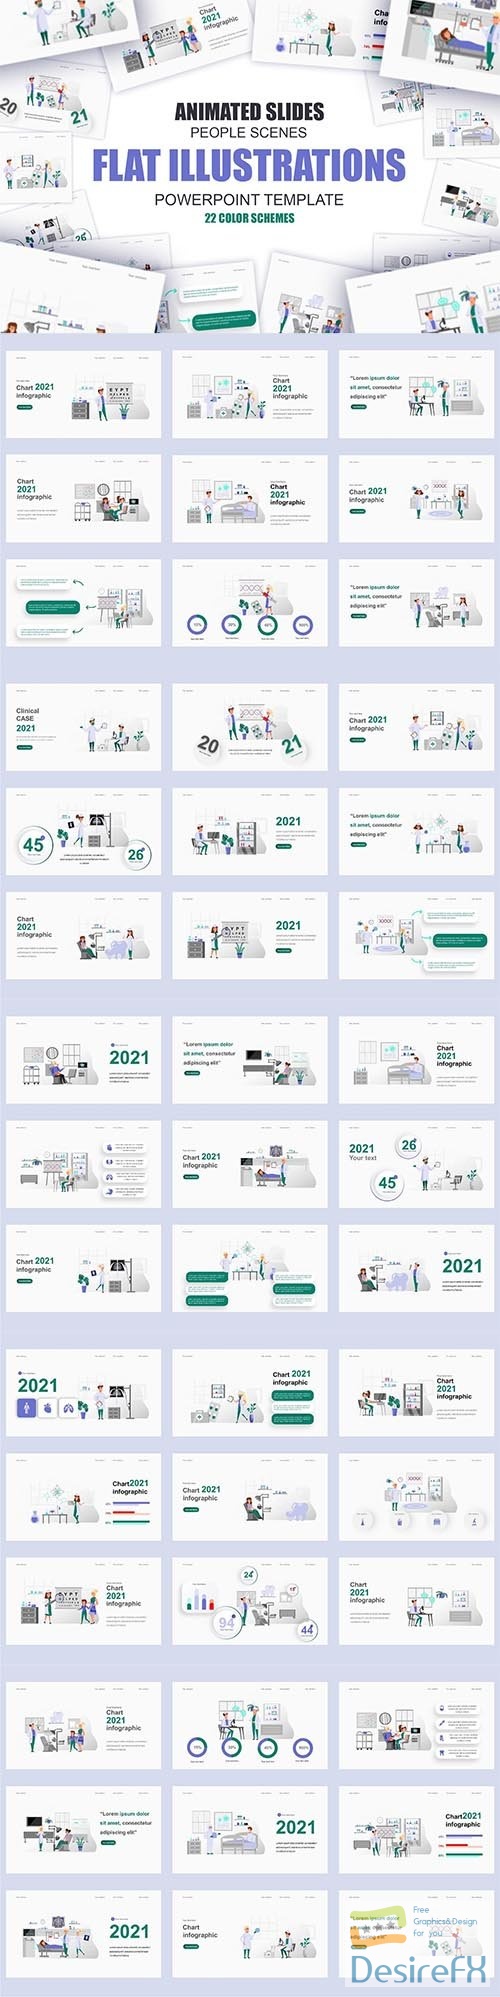 Medical Illustration Powerpoint Template